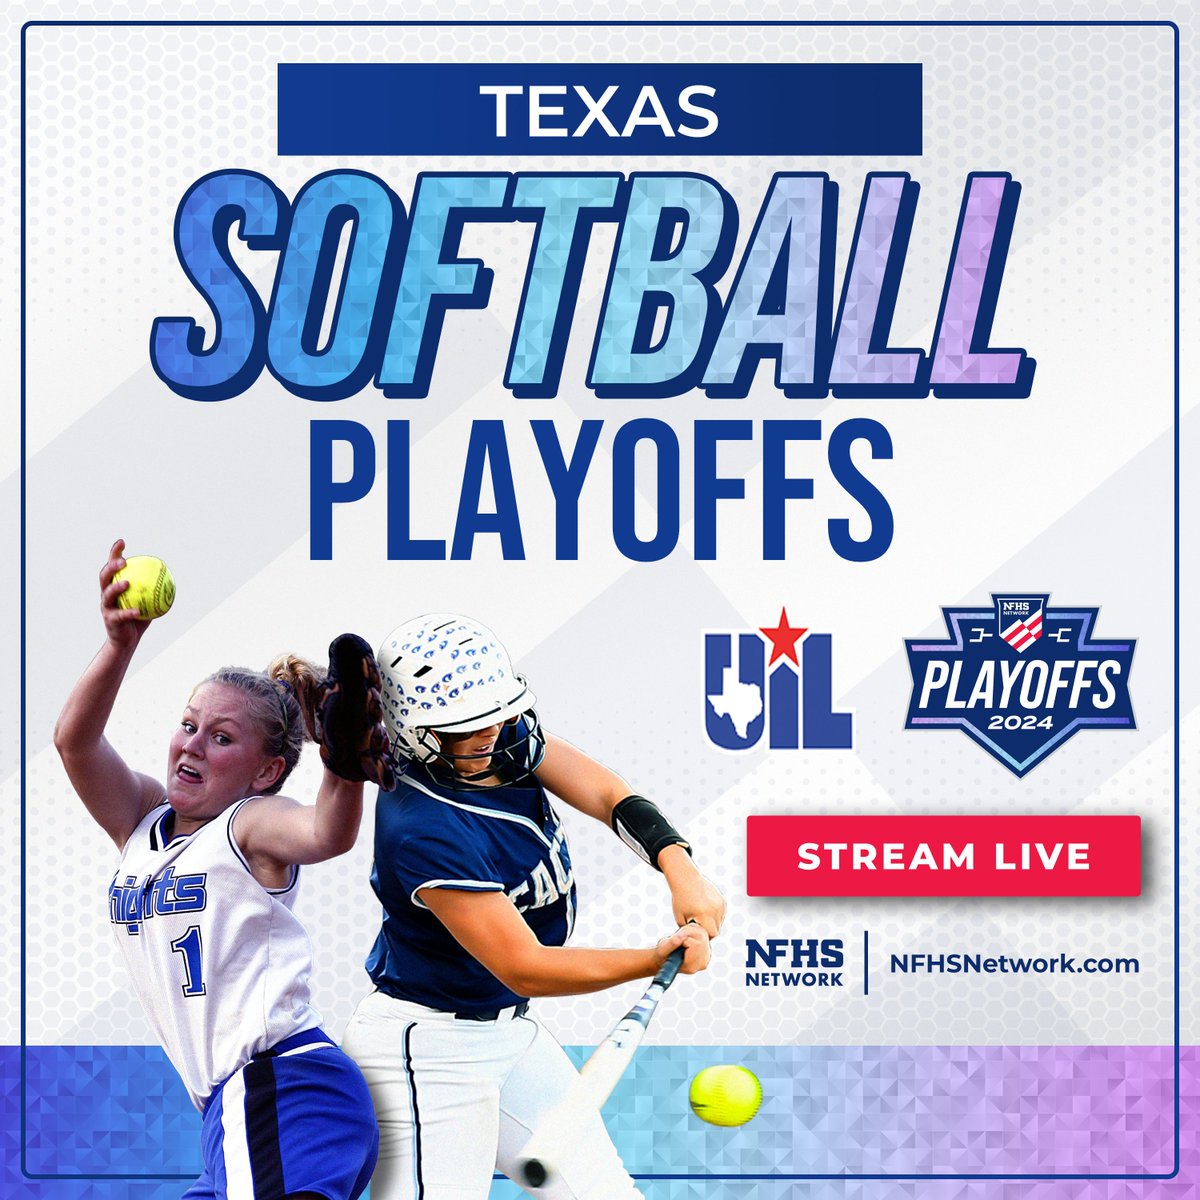 @uiltexas Don't miss any of the 2024 UIL Baseball & Softball Playoffs on the #NFHSNetwork today! ⚾️🥎 Watch live through the OFFICIAL link here: bit.ly/47mYZrC ✅